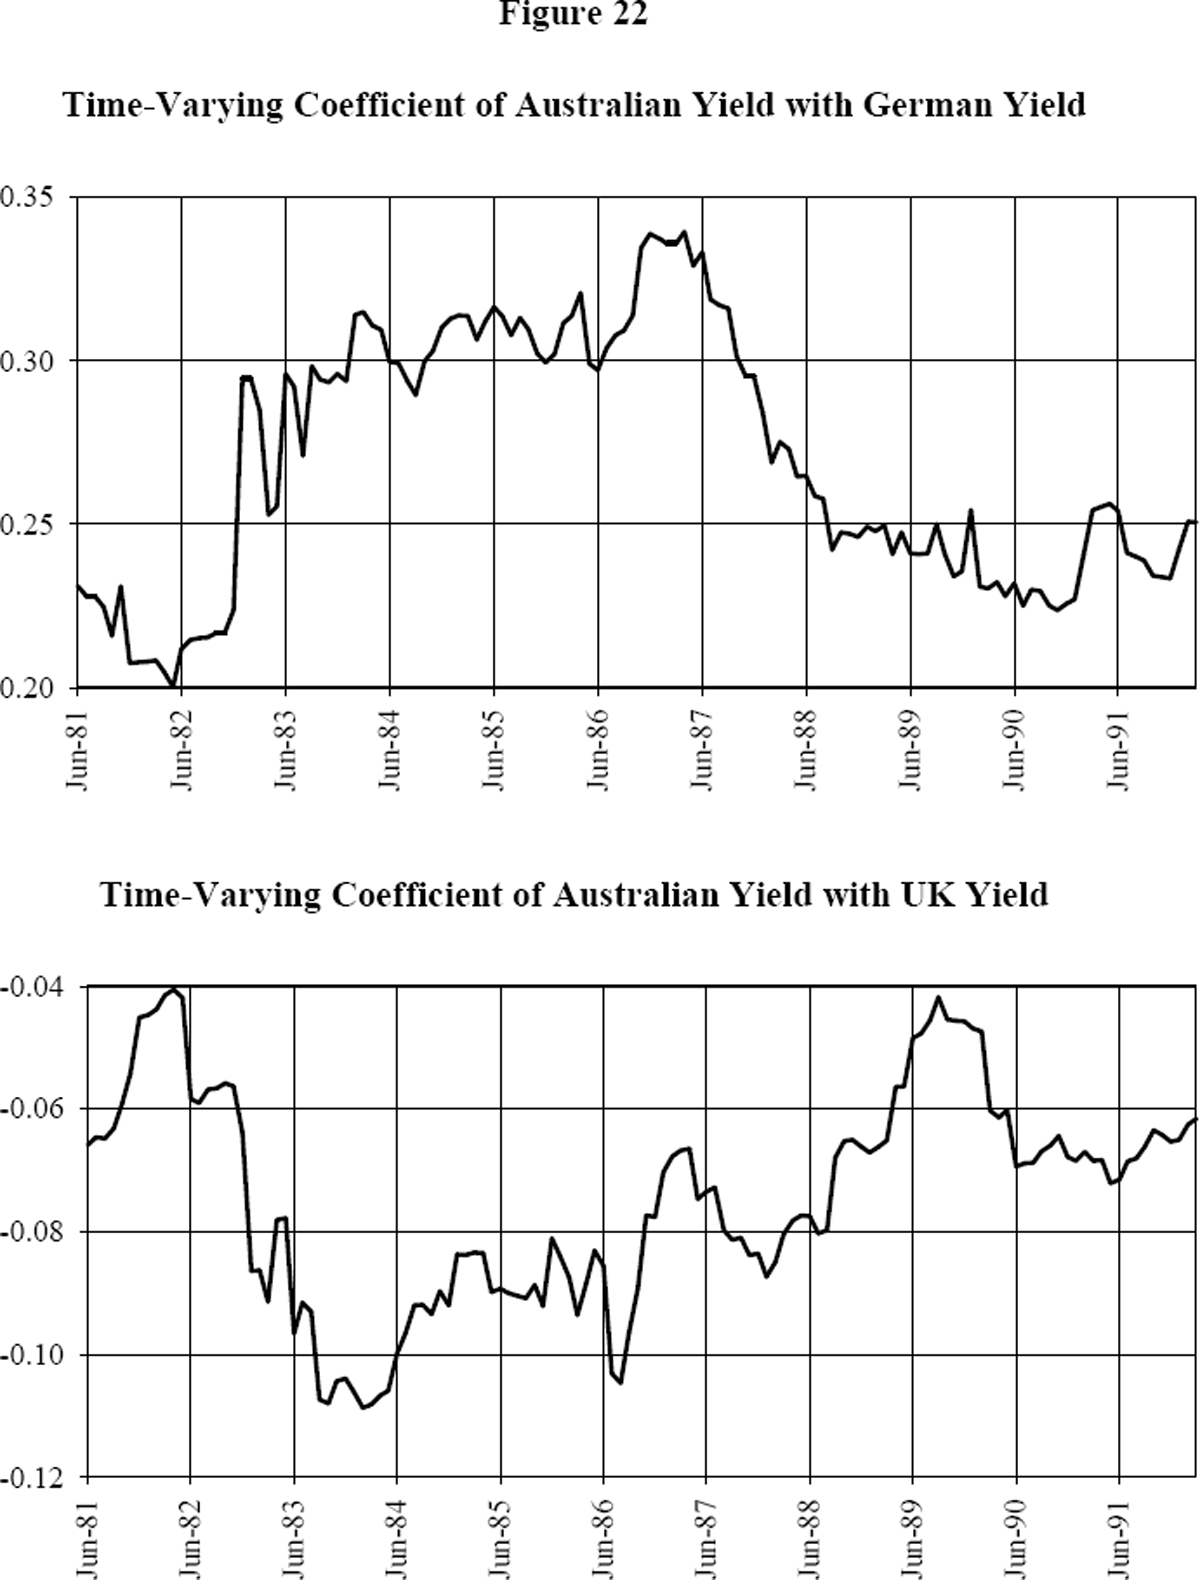 Figure 22: Time-Varying Coefficient of Australian Yield with German Yield and UK Yield